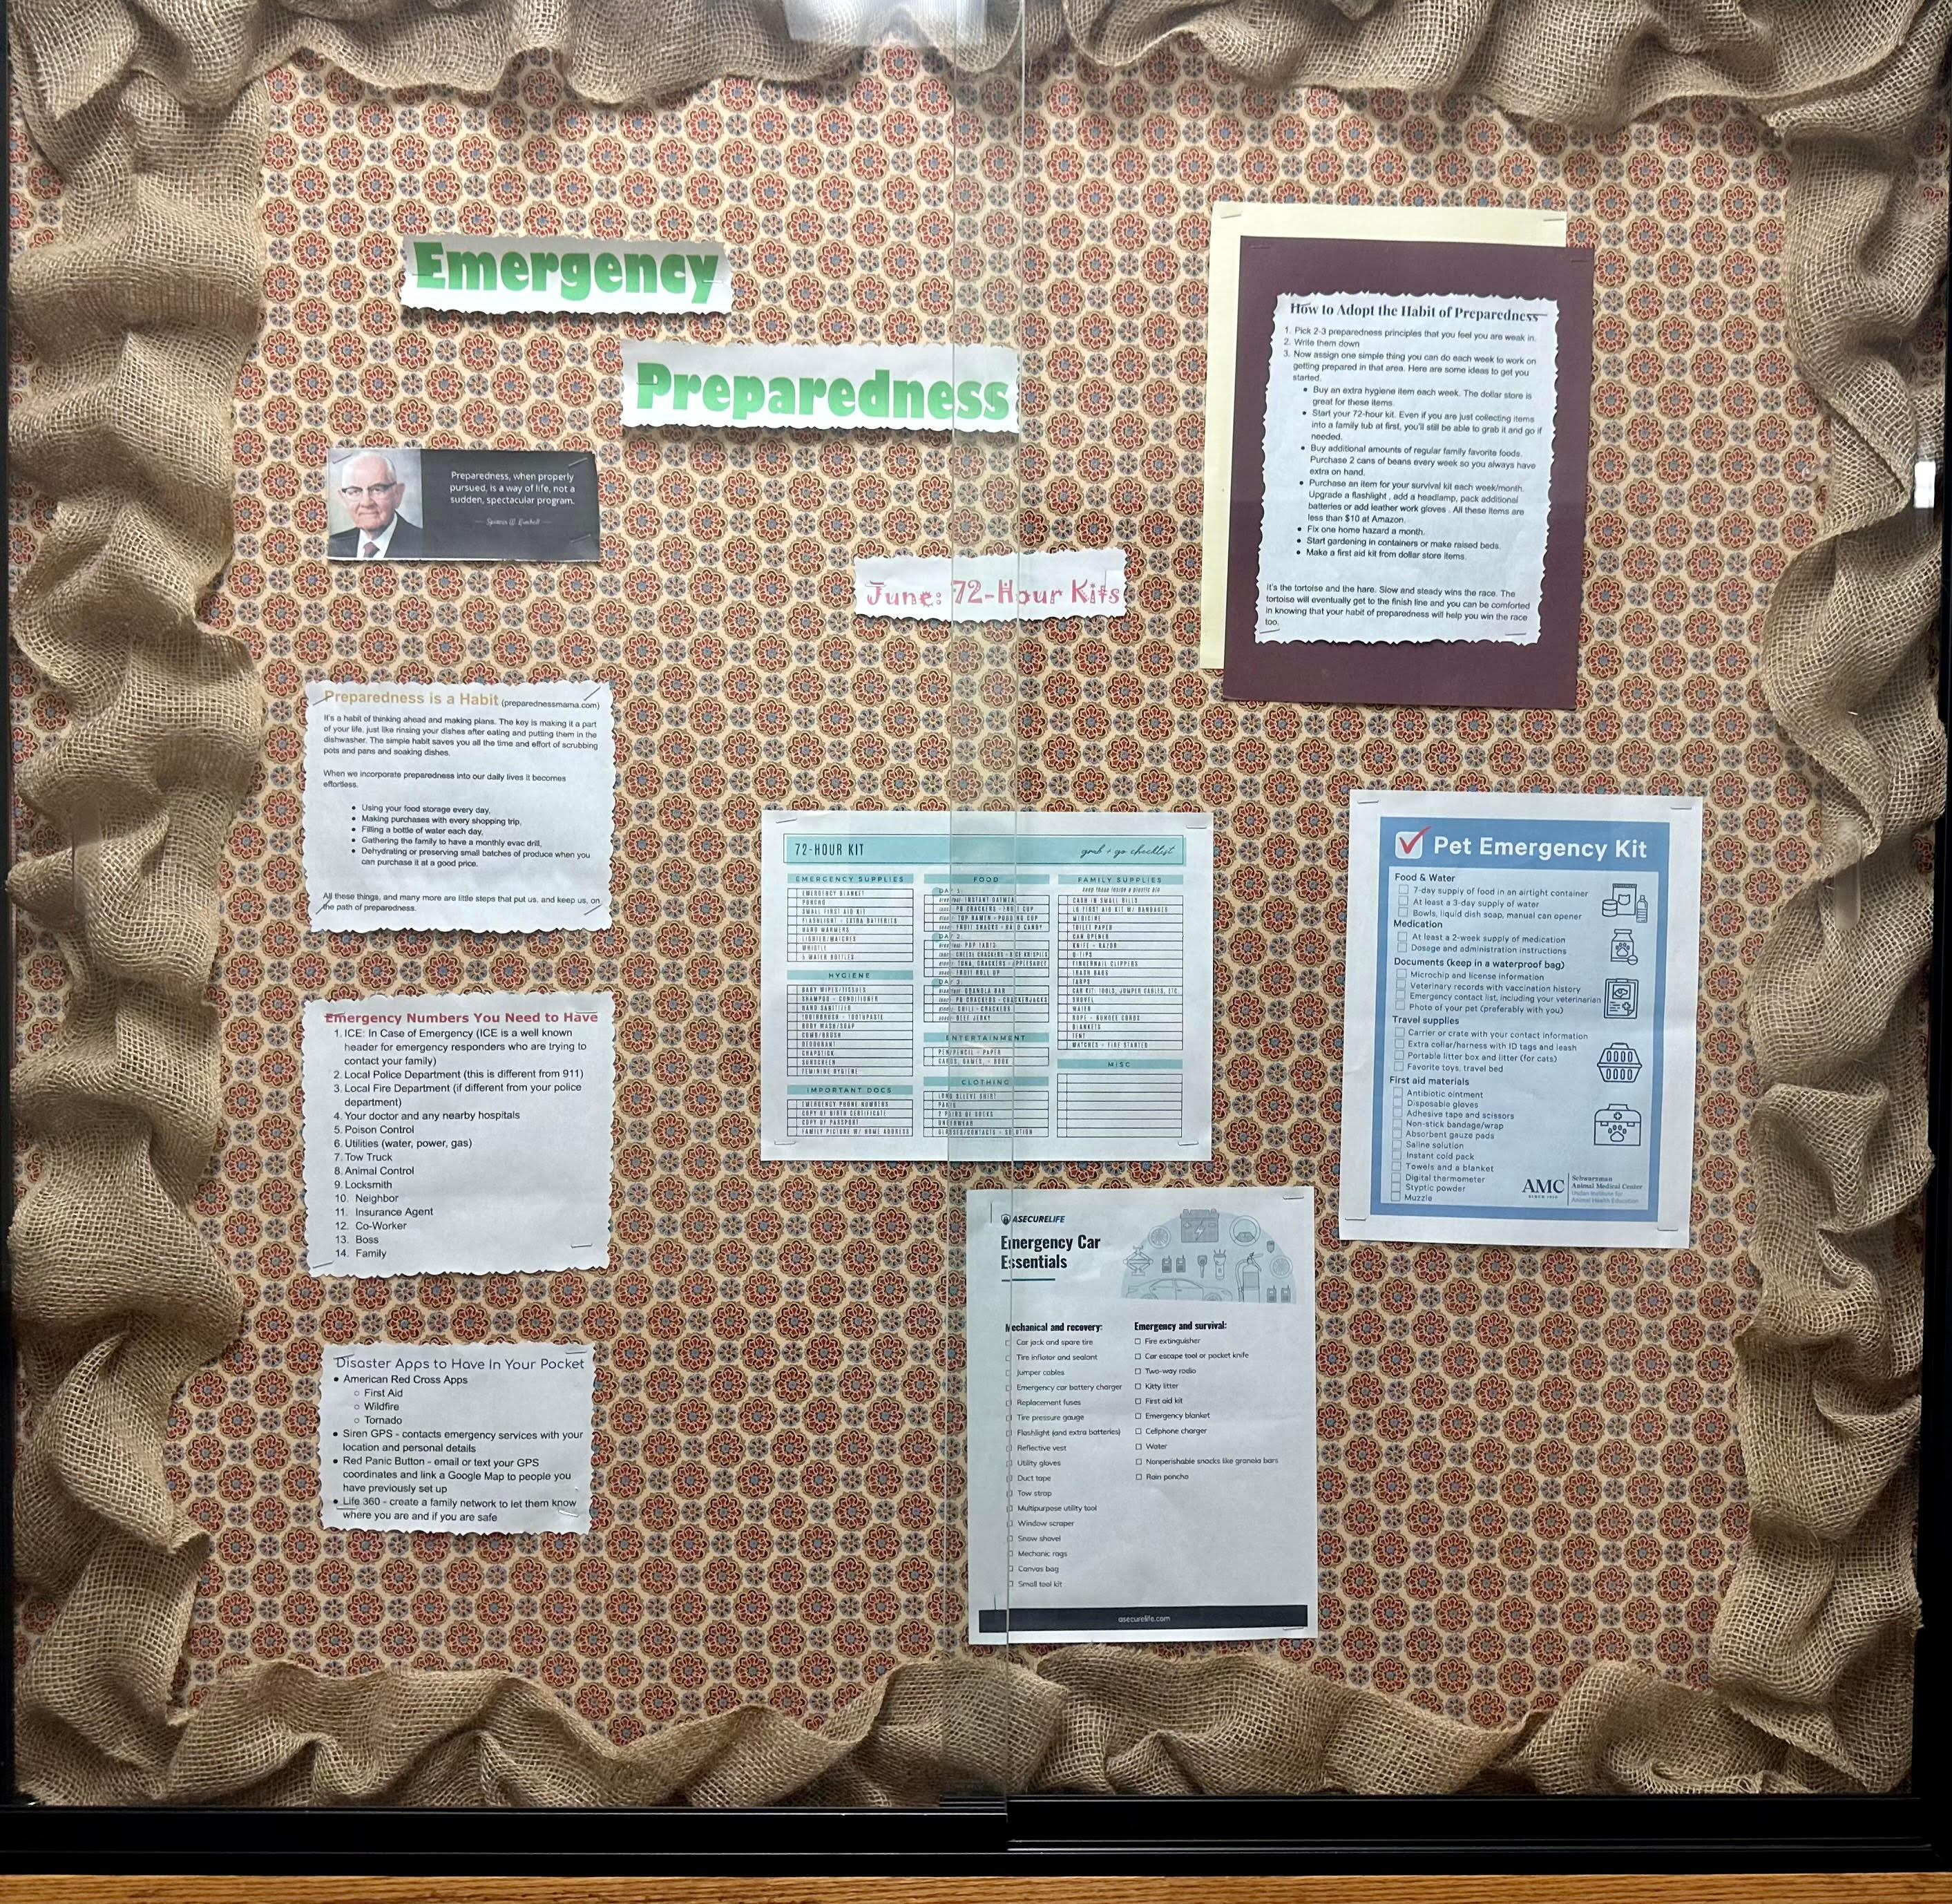 A bulletin board in the hallway of the church building.